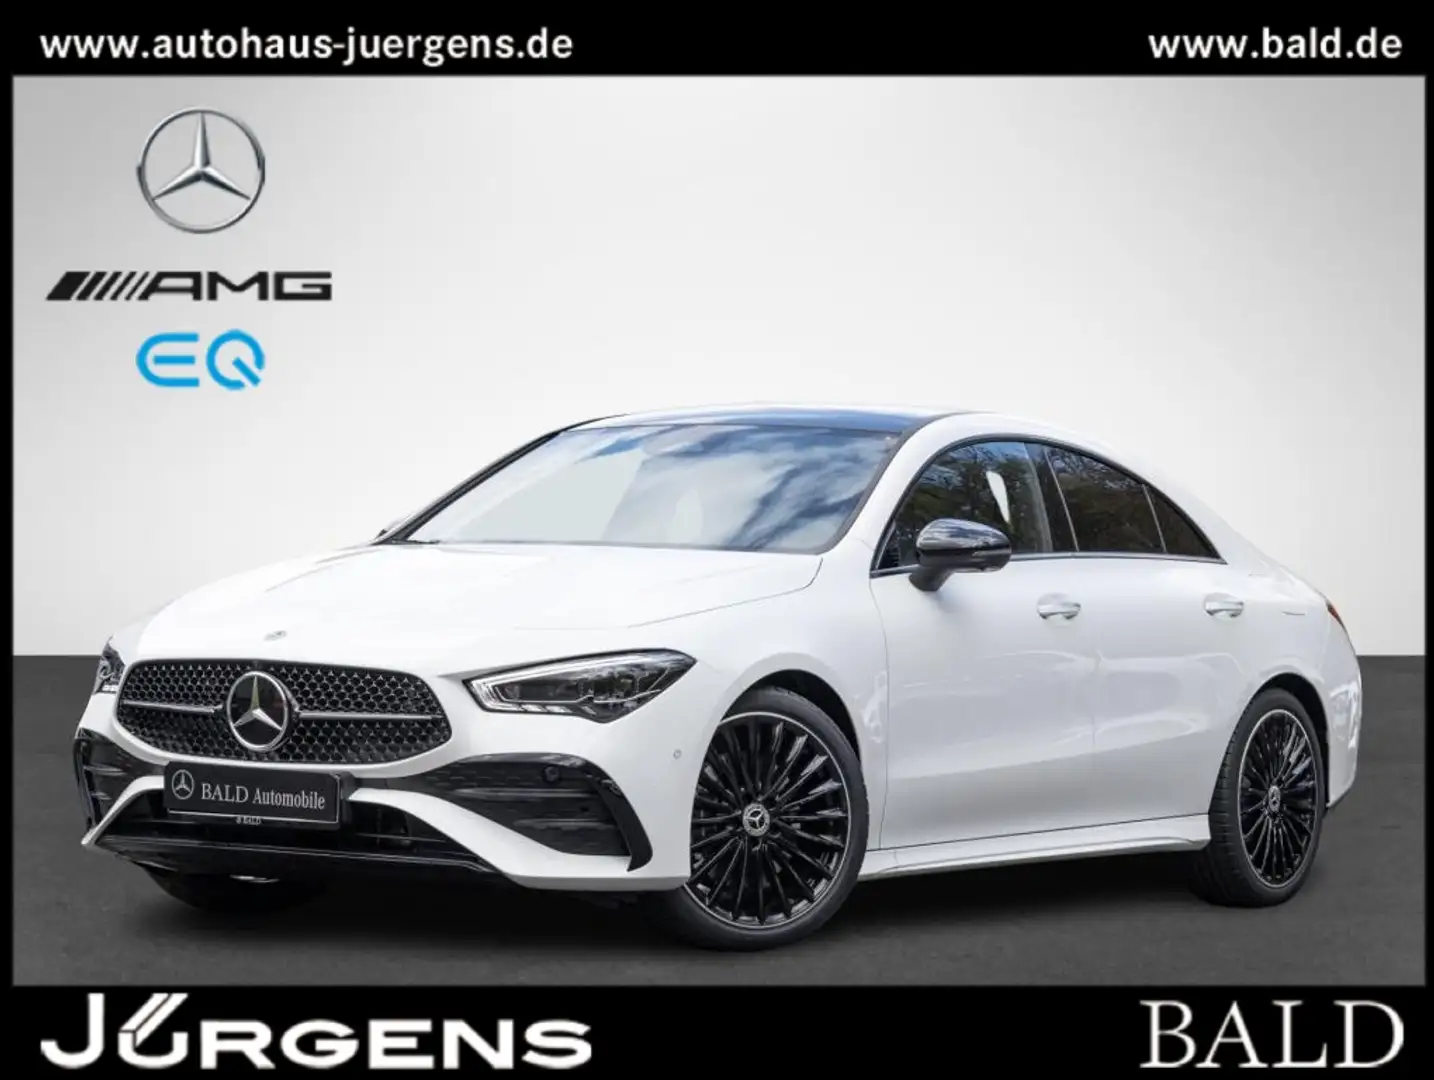 Mercedes-Benz CLA 200 AMG/Wide/ILS/Pano/360/Amb/Totw/Night/19" Wit - 1